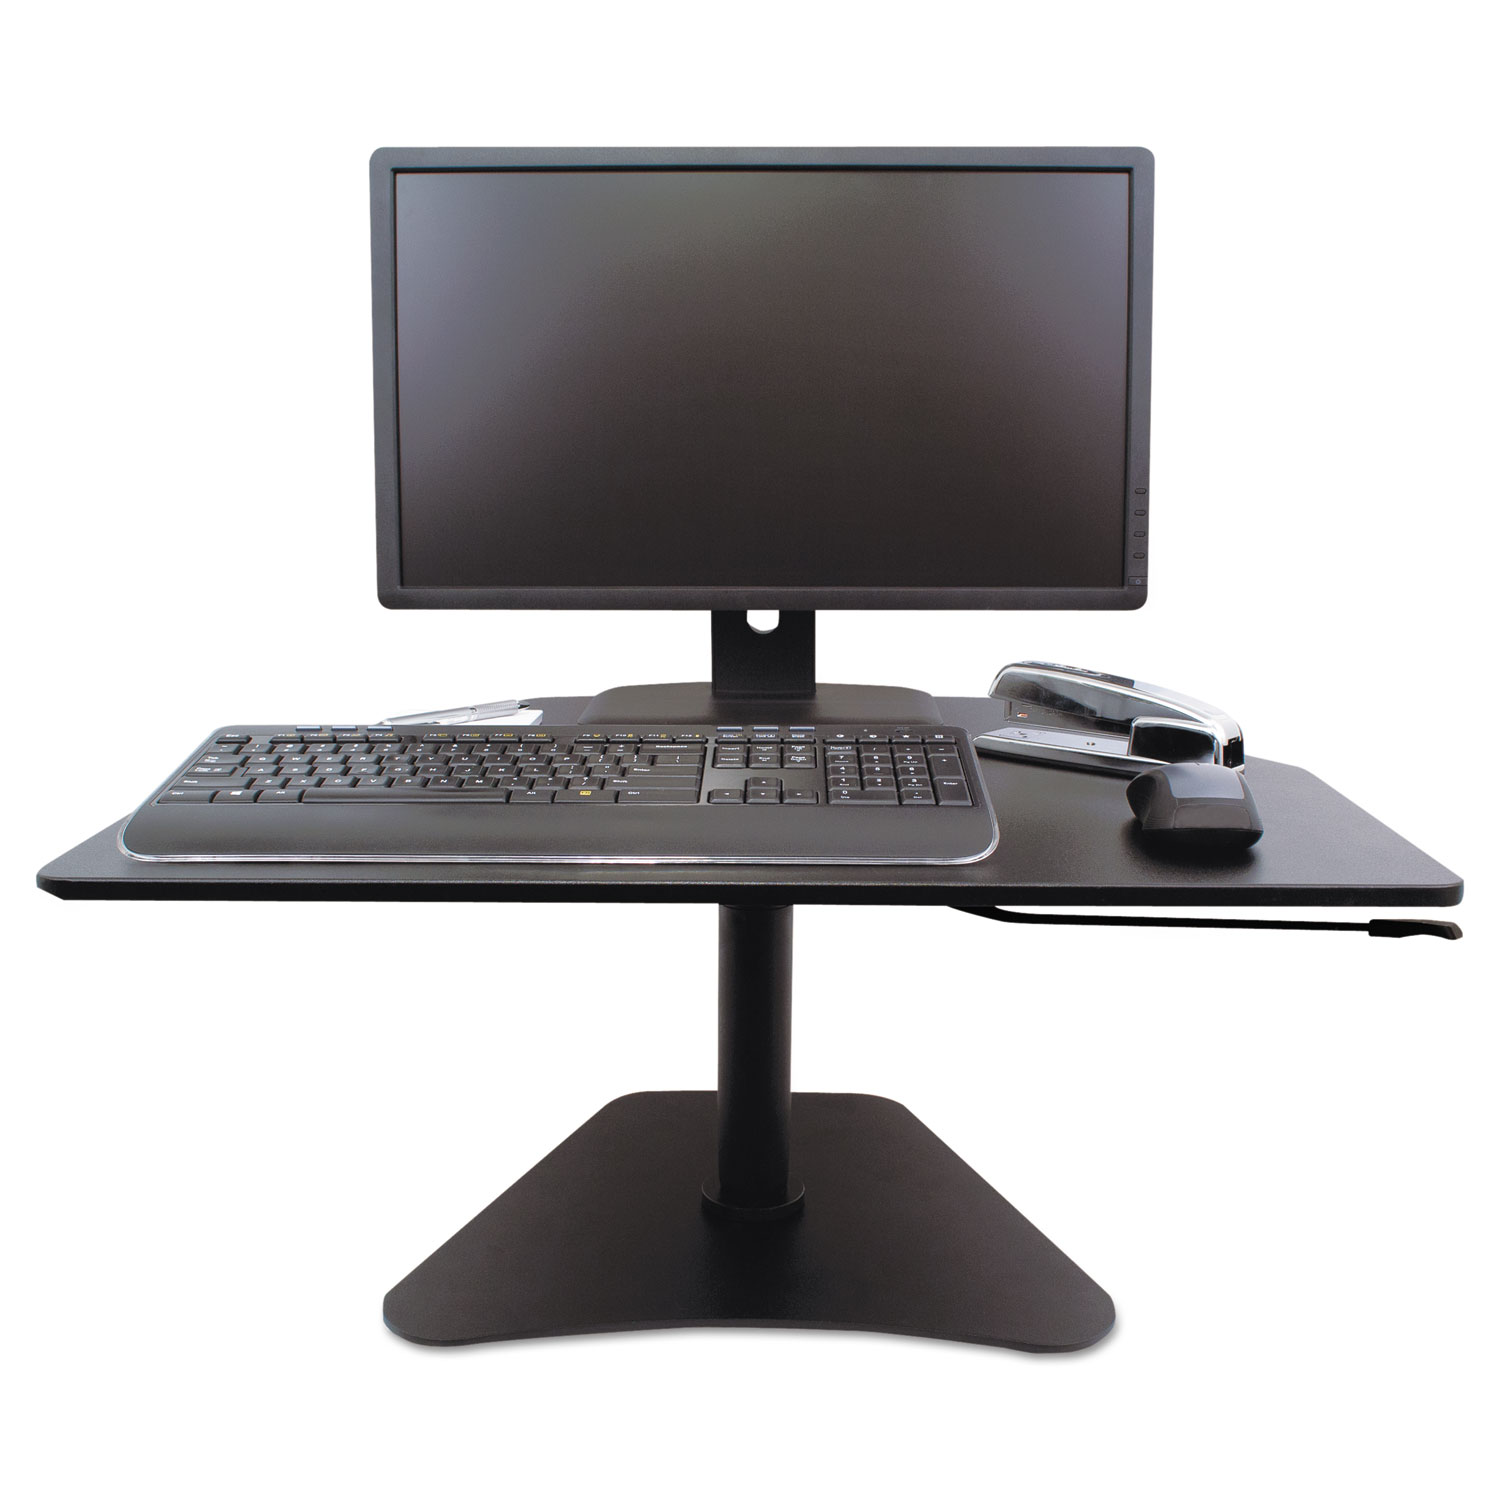  Victor DC200 High Rise Adjustable Stand-Up Desk, 28w x 23d x 16.75h, Black (VCTDC200) 